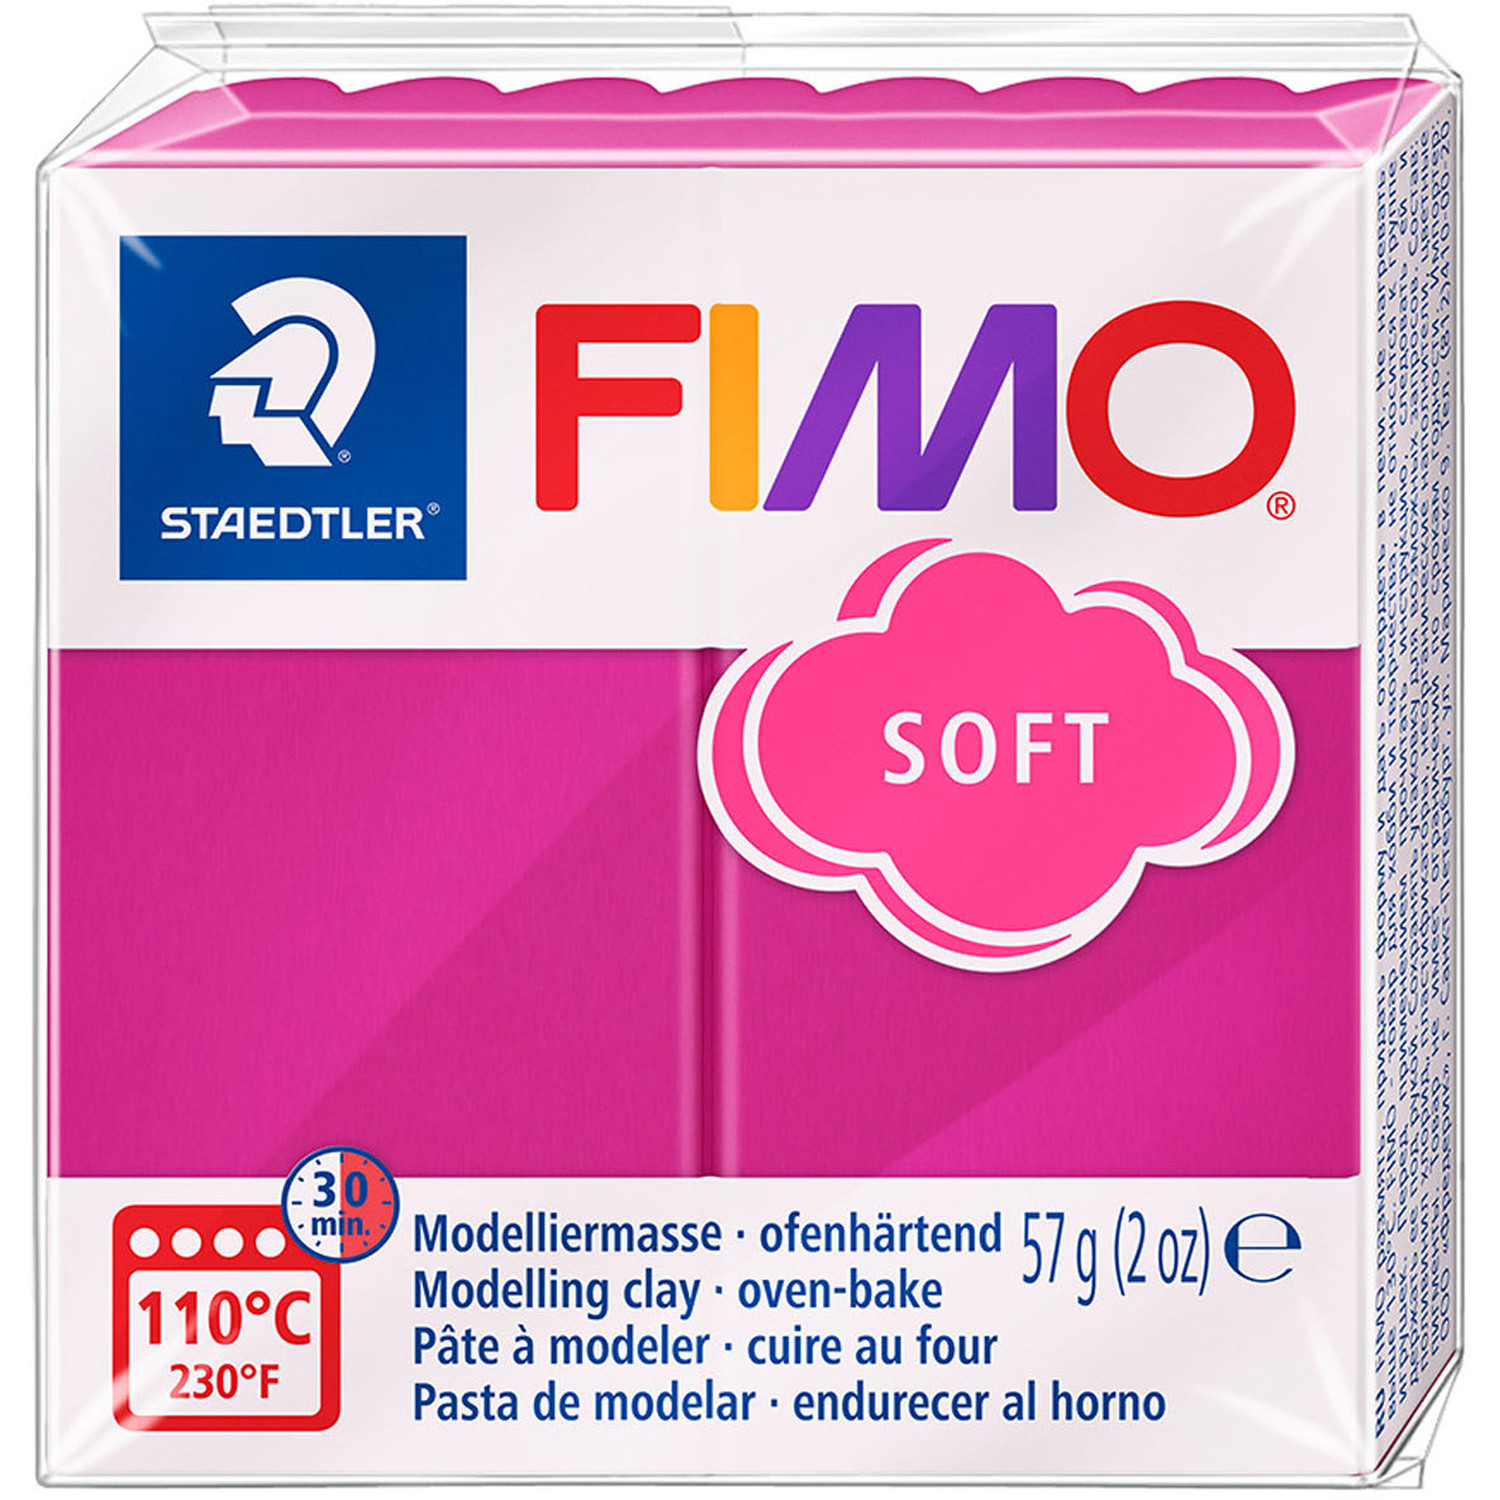 Staedtler FIMO Soft Modelling Clay Block - Raspberry Image 1